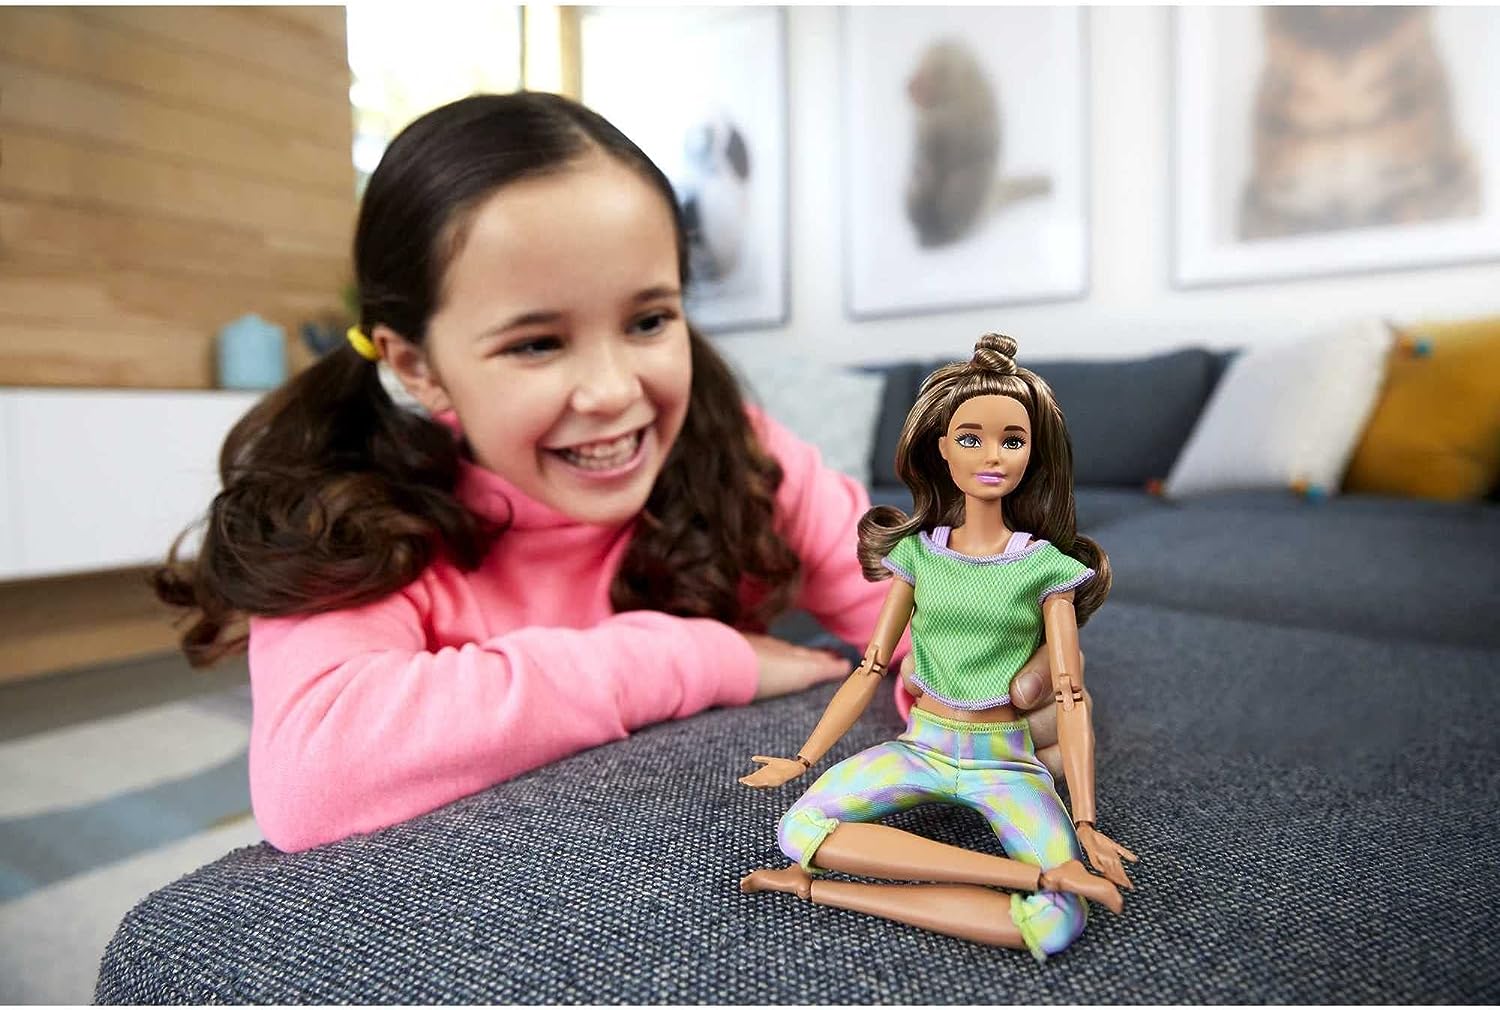 Barbie Made to move yoga, unboxing and review, tie dye girl doll 